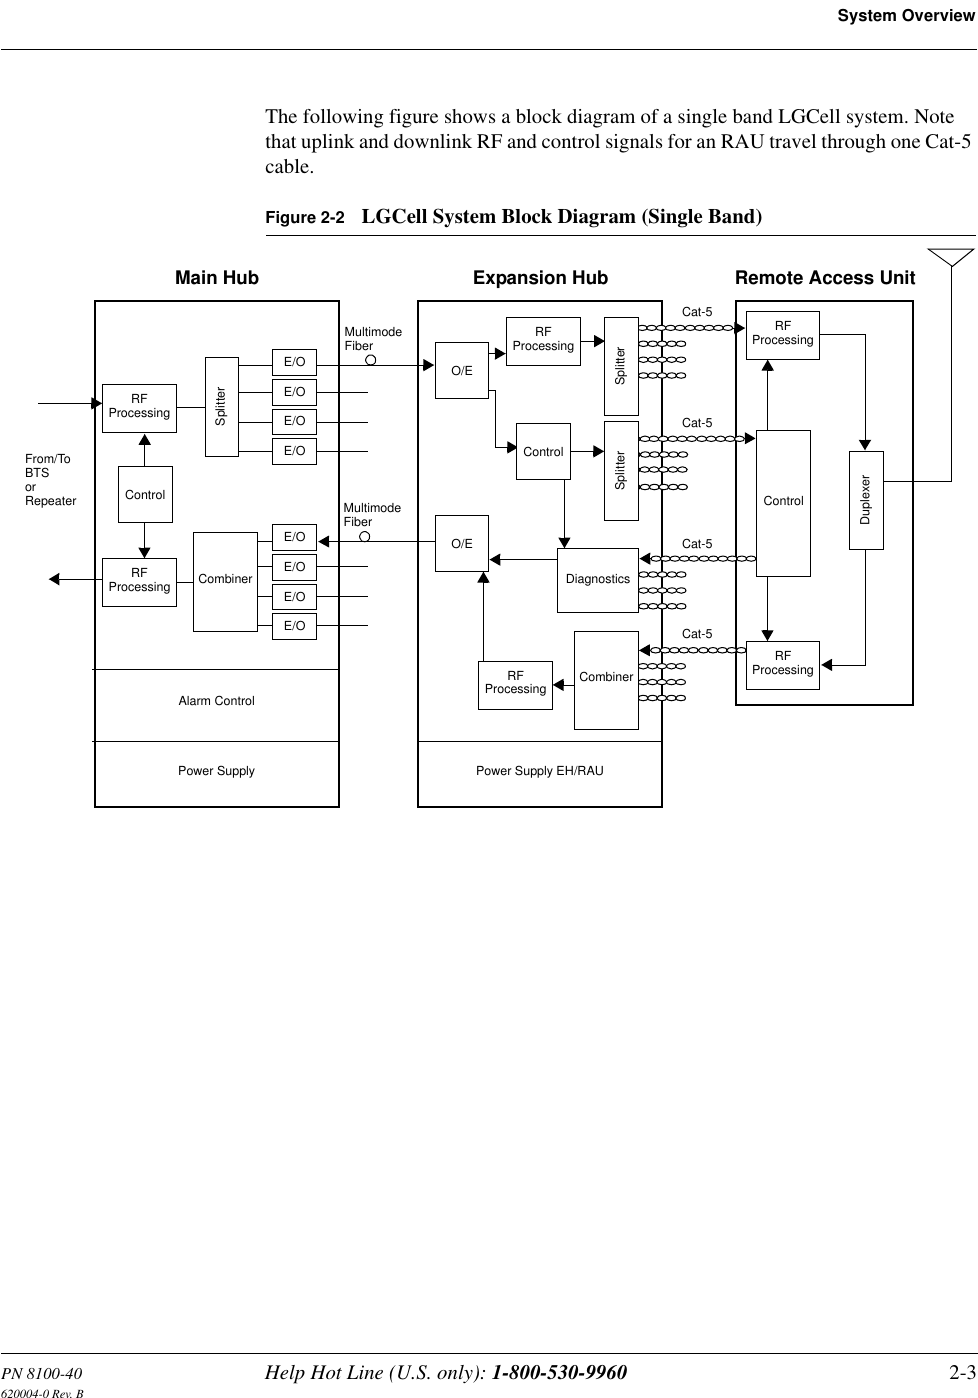 PN 8100-40 Help Hot Line (U.S. only): 1-800-530-9960 2-3620004-0 Rev. BSystem OverviewThe following figure shows a block diagram of a single band LGCell system. Note that uplink and downlink RF and control signals for an RAU travel through one Cat-5 cable.Figure 2-2 LGCell System Block Diagram (Single Band)RFProcessingRFProcessing CombinerSplitterE/OE/OE/OE/OE/OE/OE/OE/ORFProcessingRFProcessingDuplexerO/EAlarm ControlPower Supply Power Supply EH/RAUControlSplitterSplitterDiagnosticsRFProcessingRemote Access UnitExpansion HubMain HubBTSorRepeaterO/ERFProcessingControlCombinerControlFrom/ToMultimodeFiberMultimodeFiberCat-5Cat-5Cat-5Cat-5